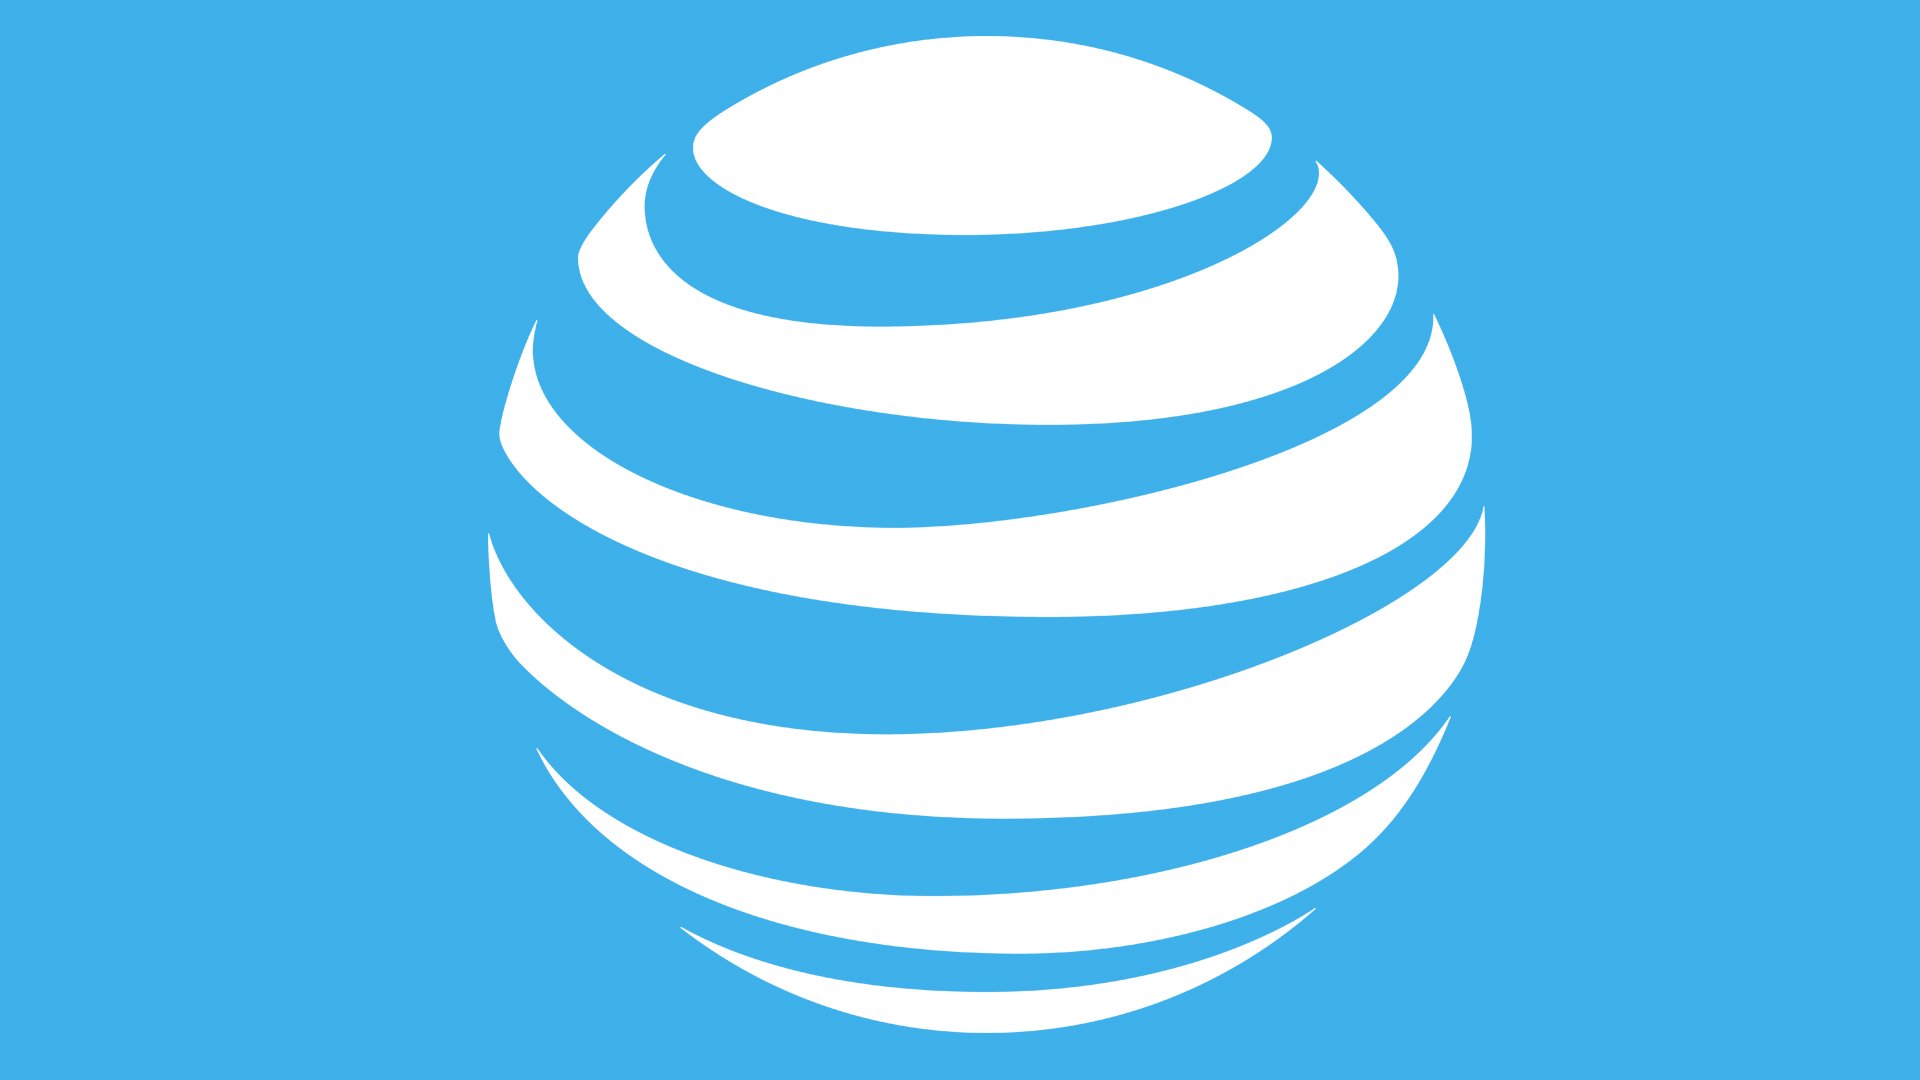 Remote AT&T Careers - How to Get Work Today